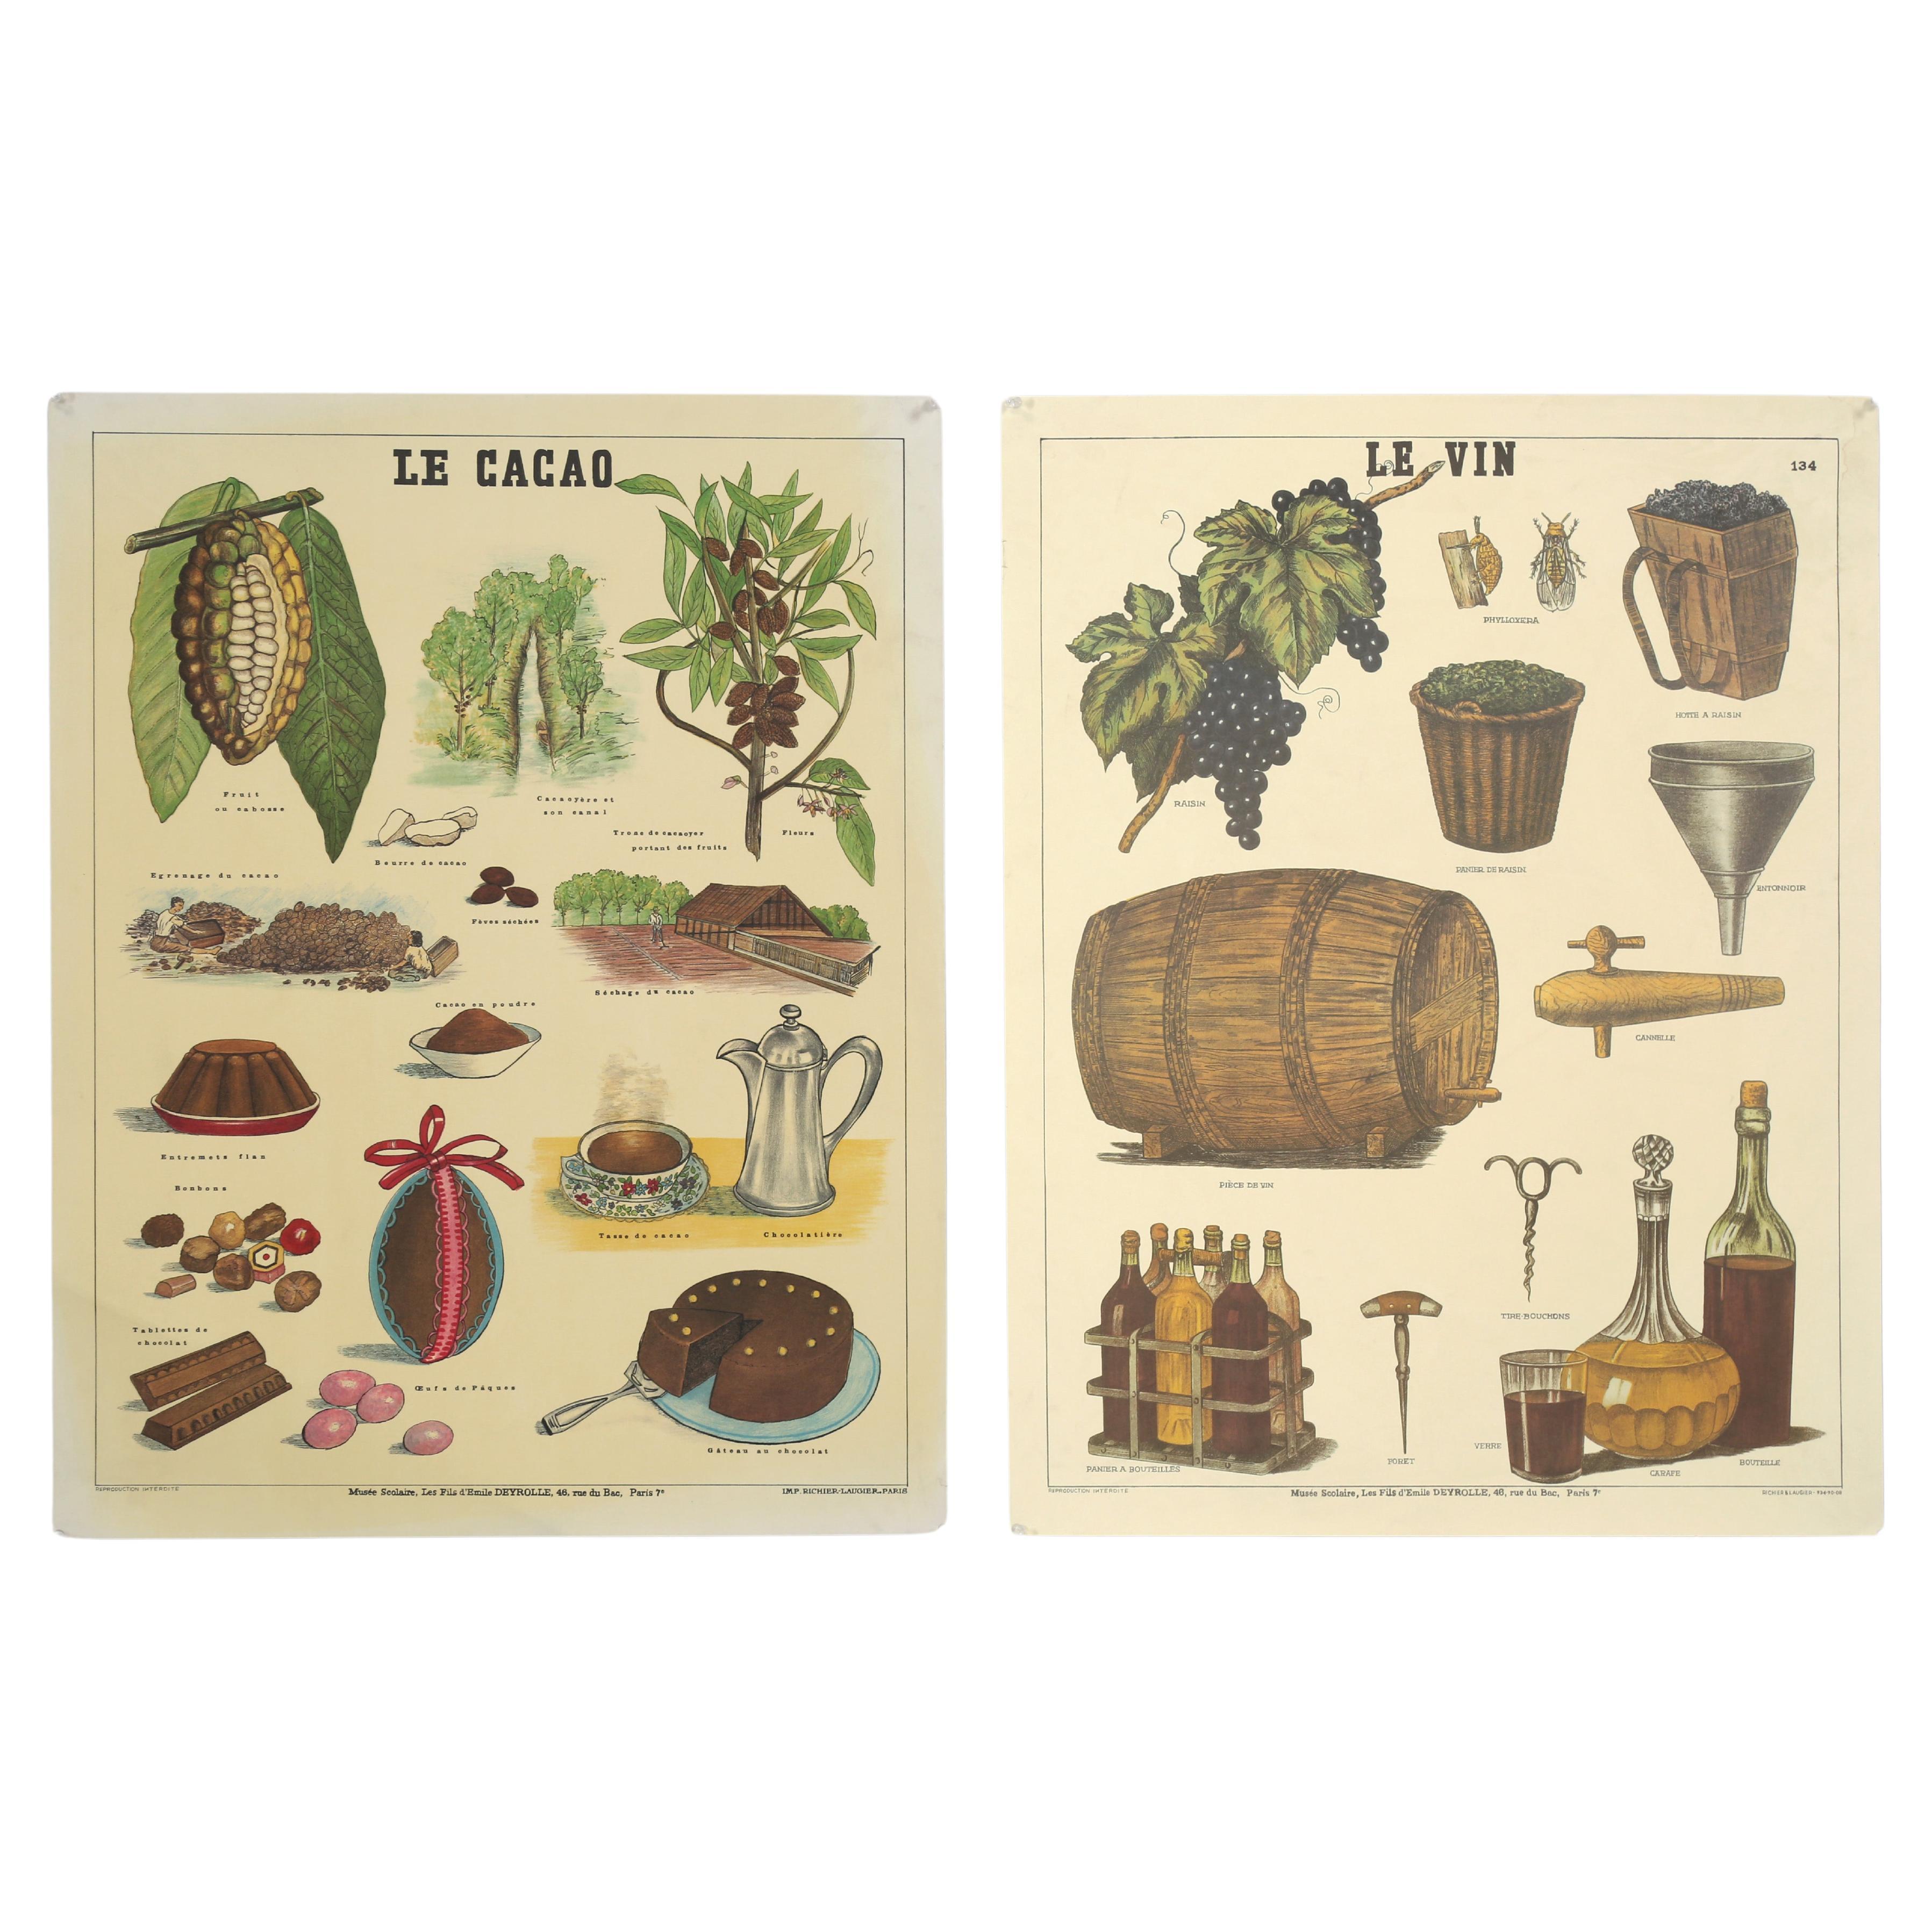 Pair of Old French Posters for Chocolate and Wine from Paris, France